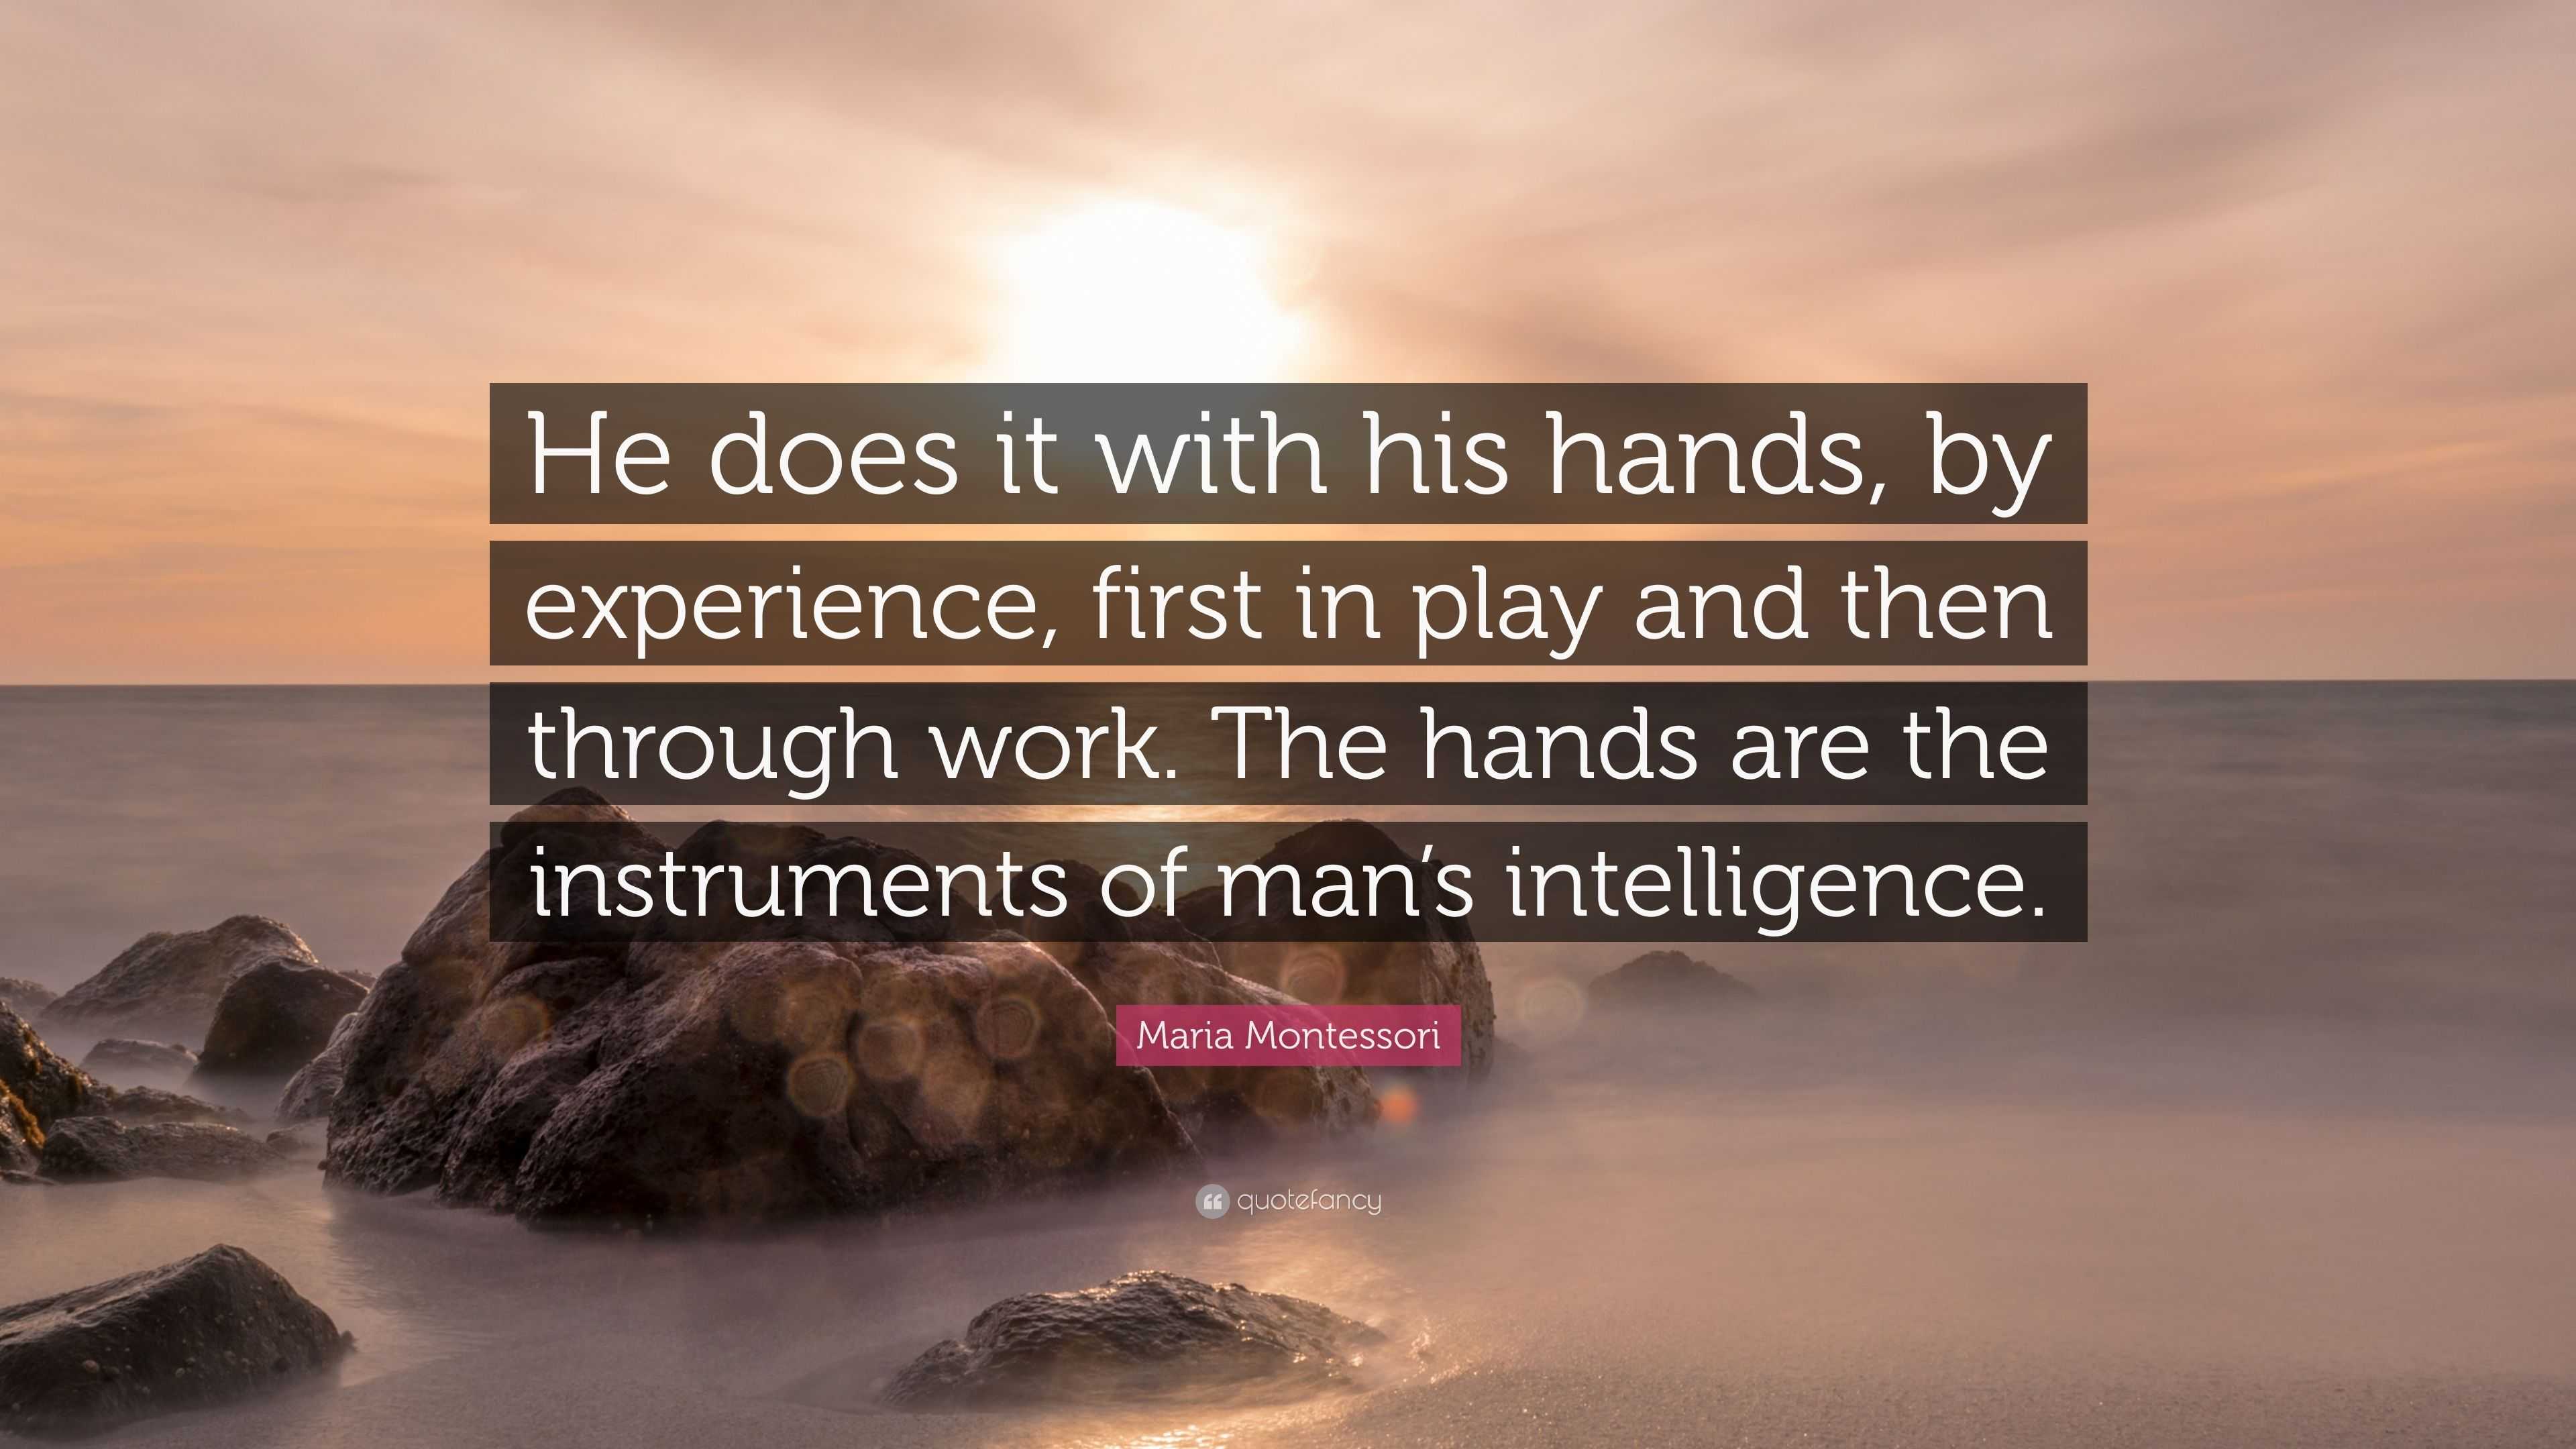 Maria Montessori Quote: “He does it with his hands, by experience